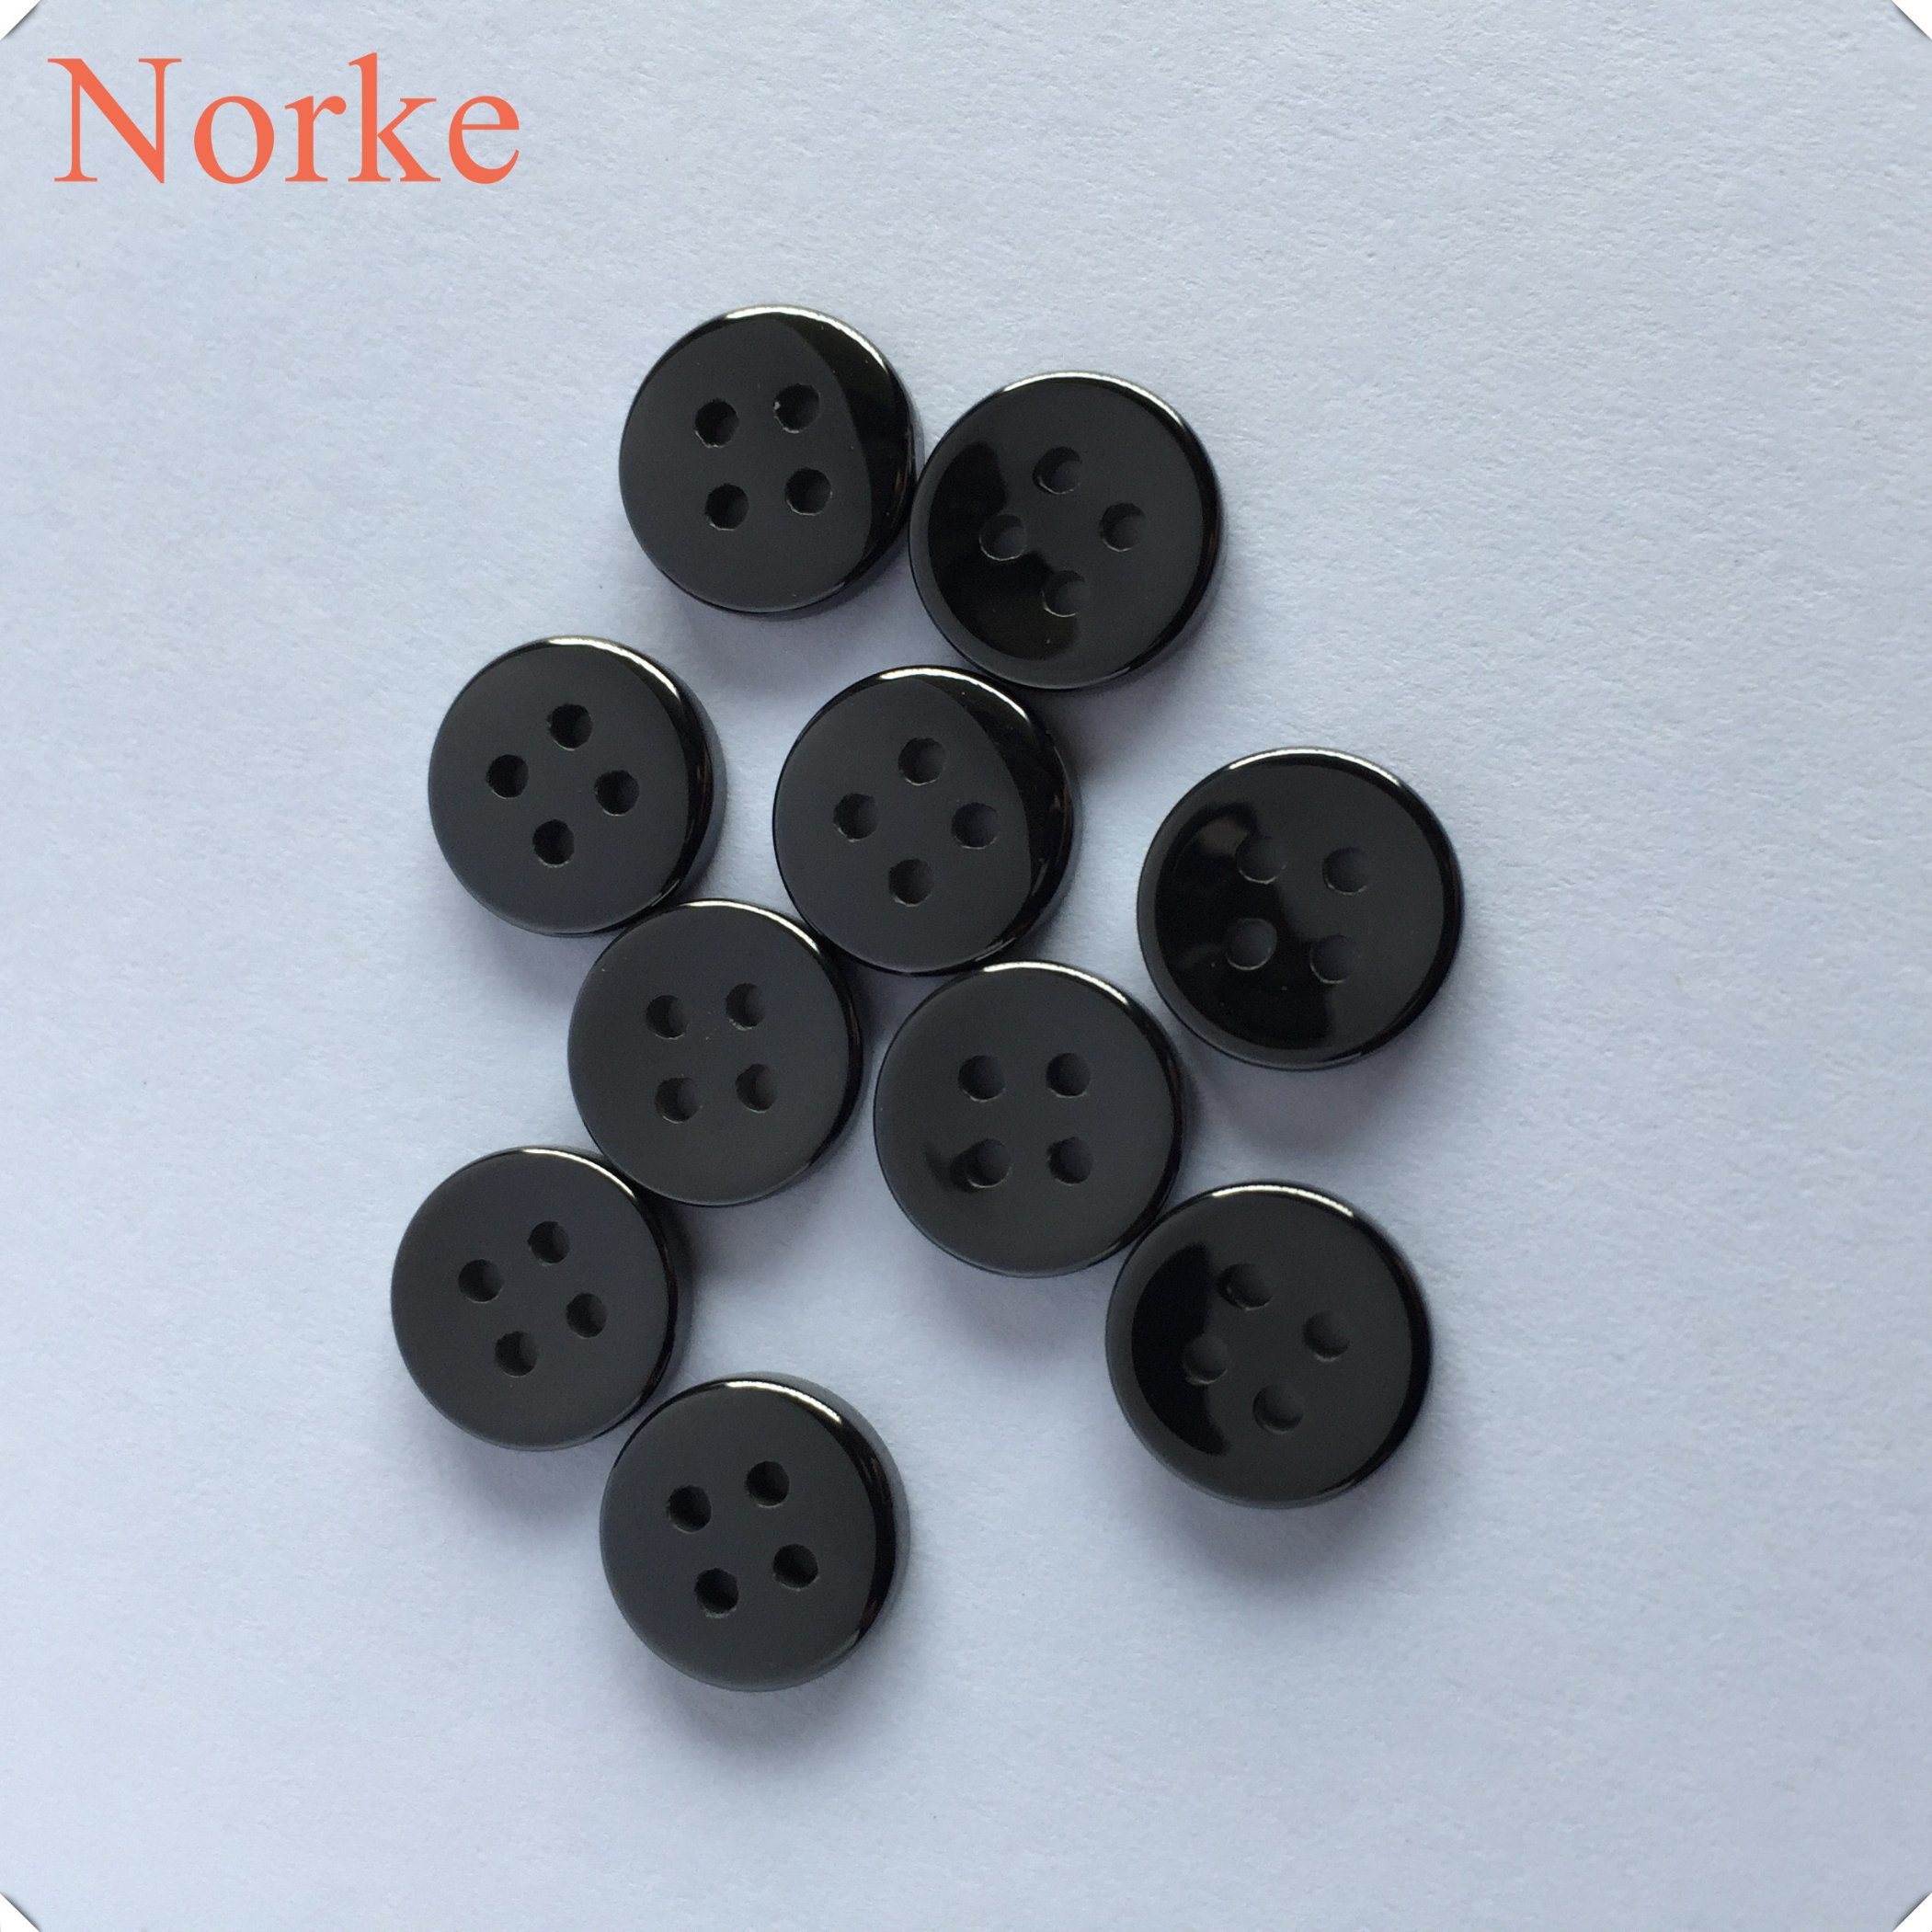 High Quality Ceramic 4 Holes Sewing Button